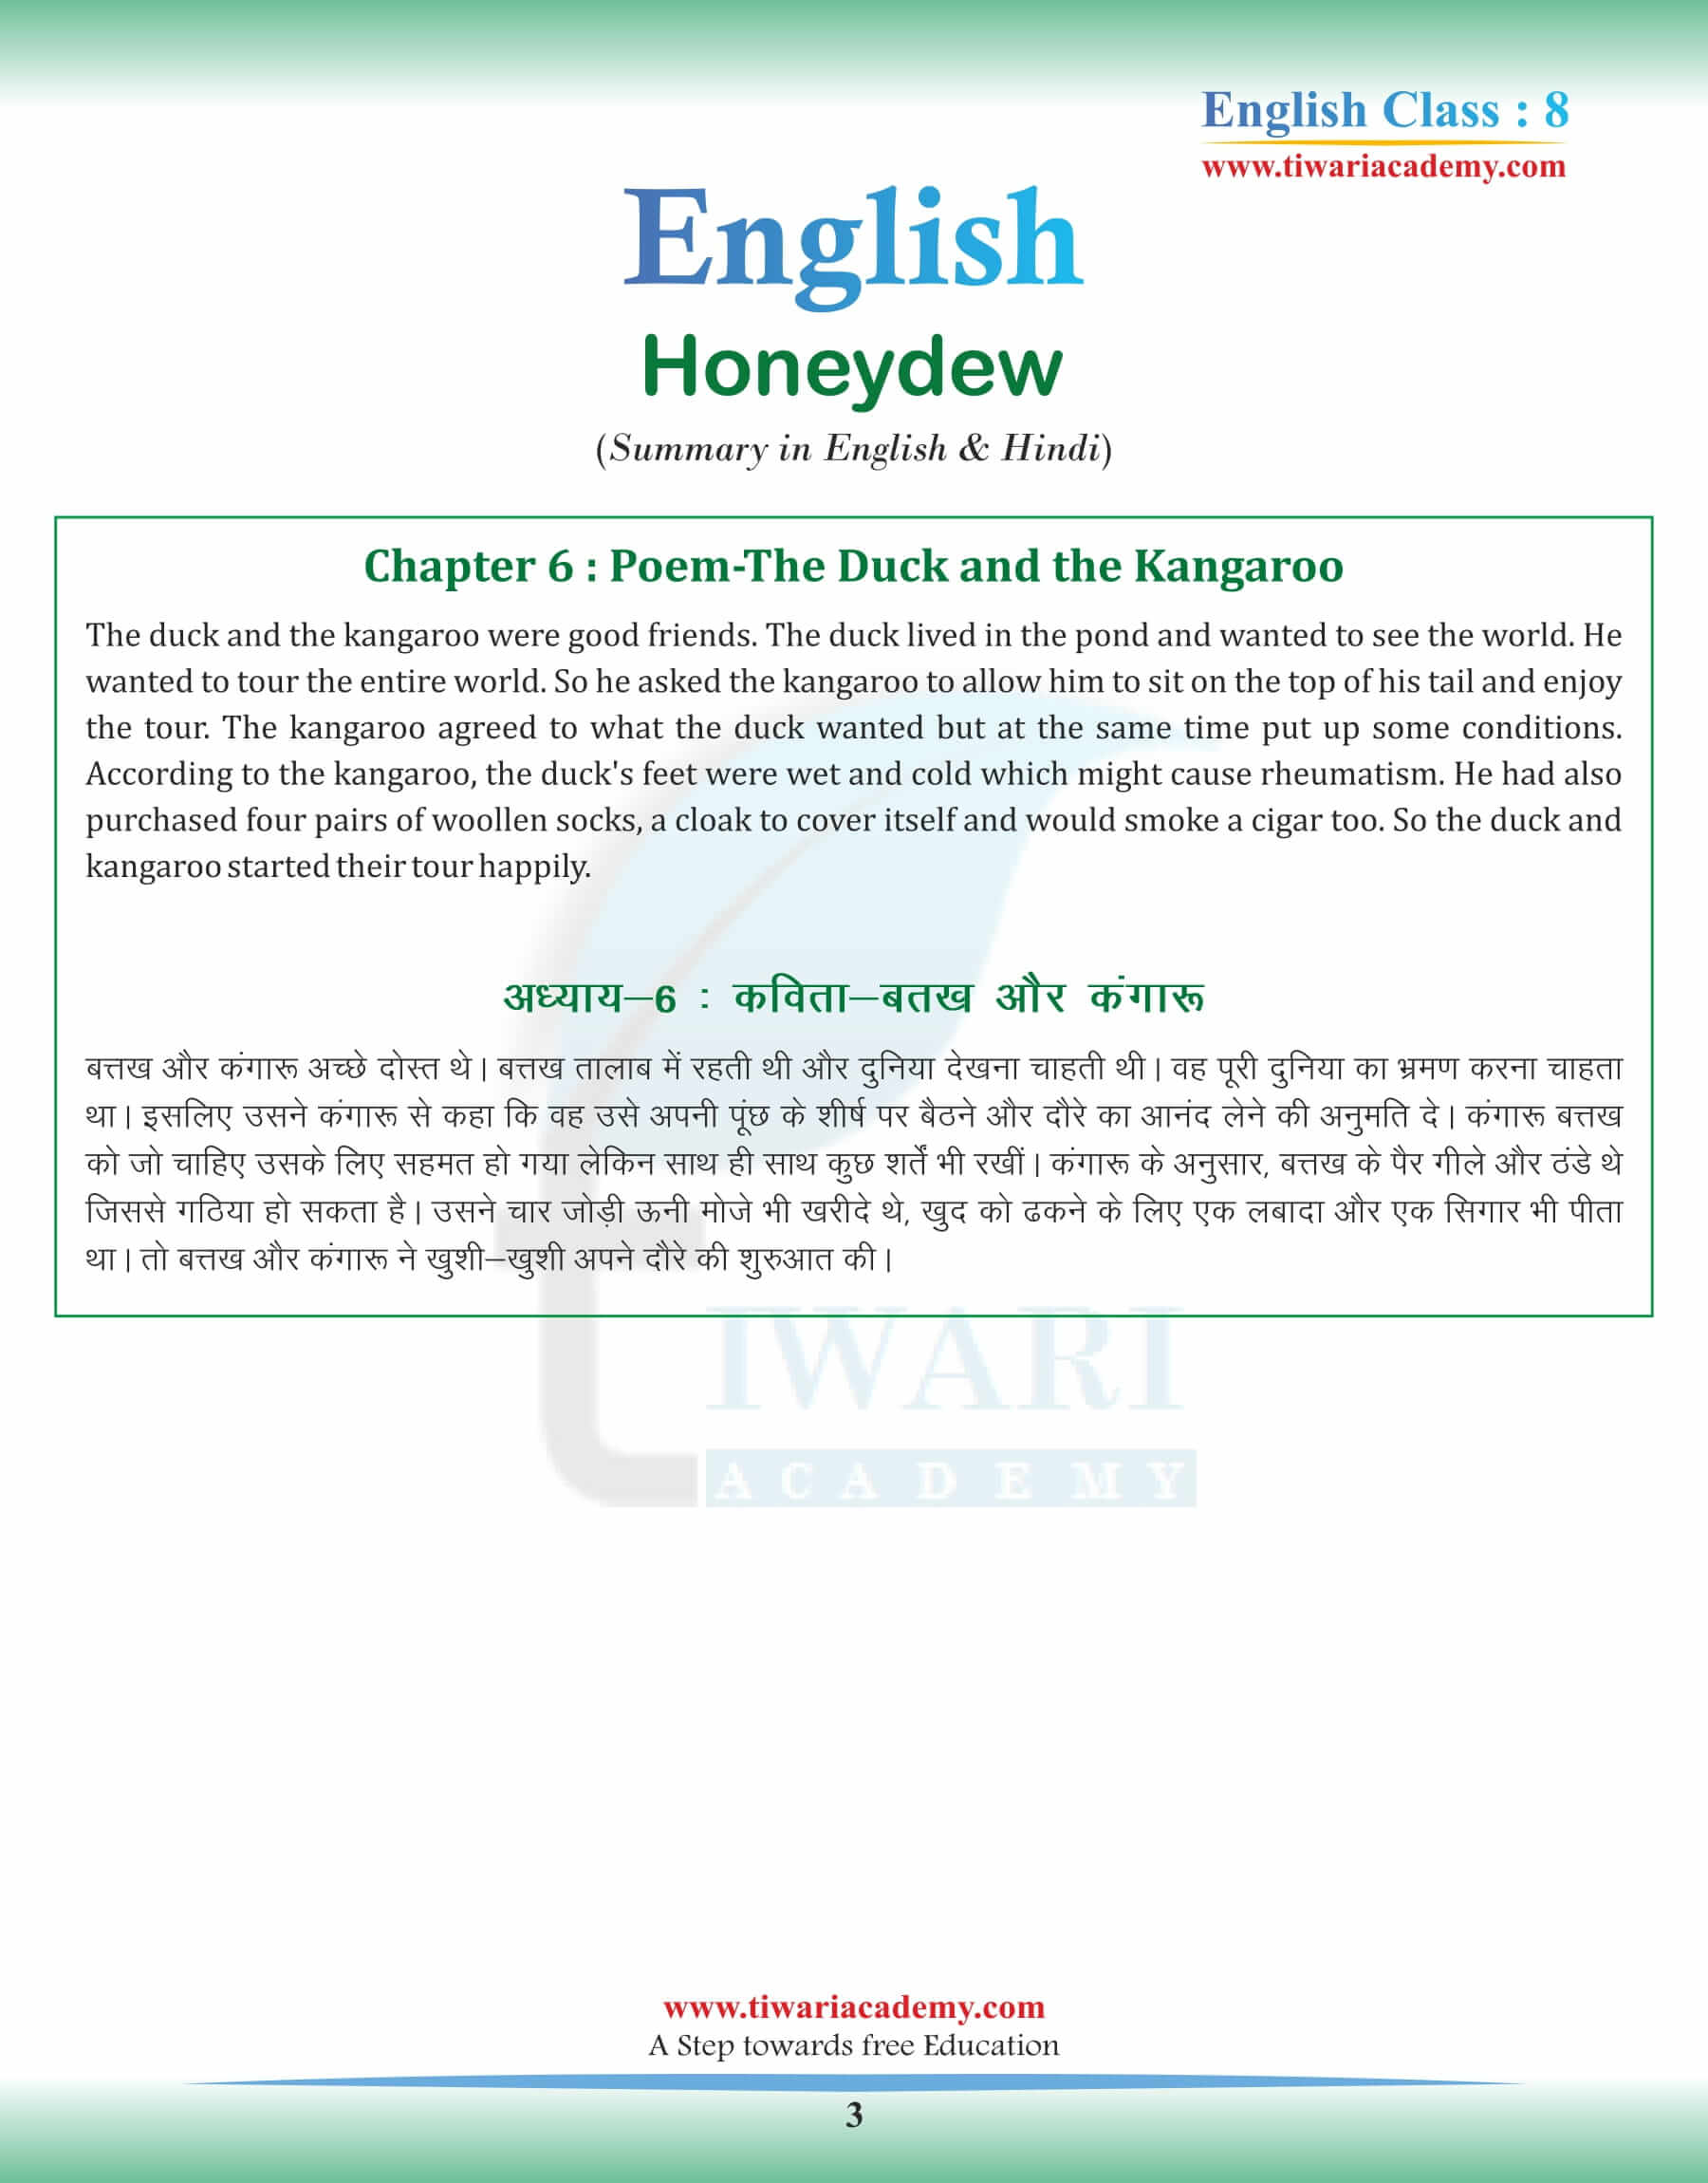 Class 8 English Chapter 6 Summary in Hindi and English